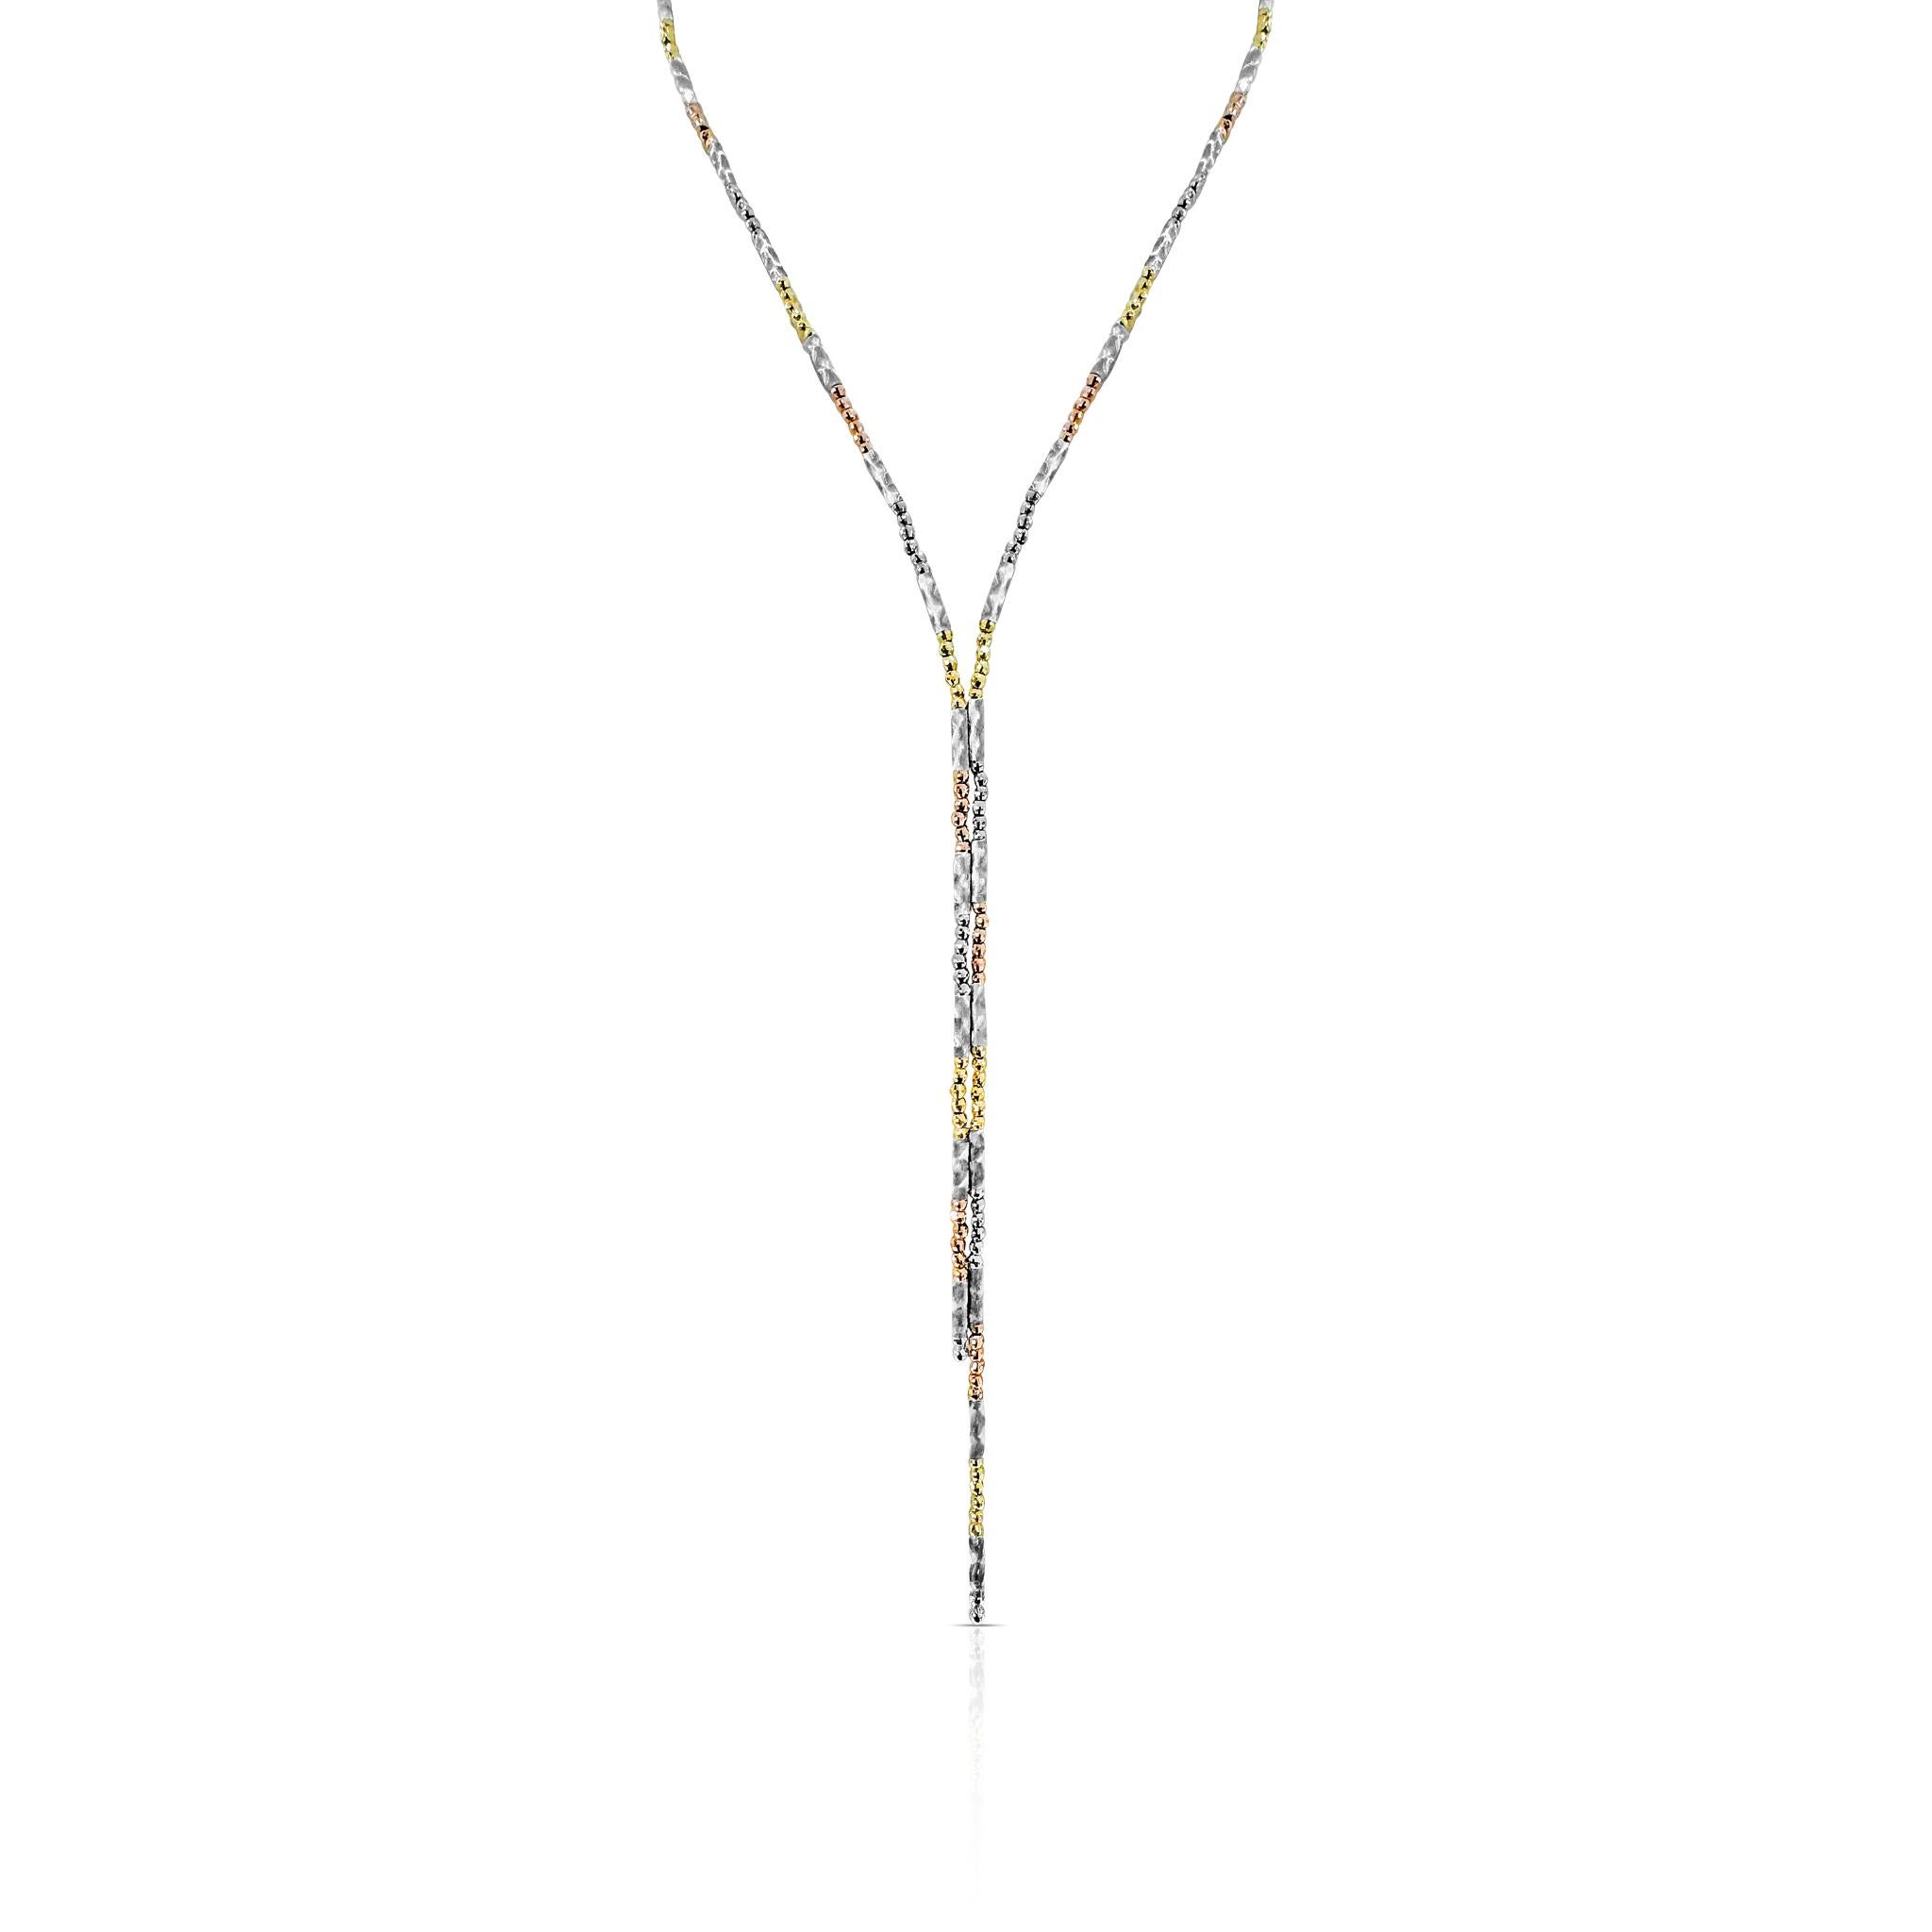 Tresor Beautiful Necklace. The Necklace are an ode to the luxurious yet classic beauty with sparkly gemstones and feminine hues. Their contemporary and modern design make them versatile in their use. The Necklace are perfect to be worn daily, at